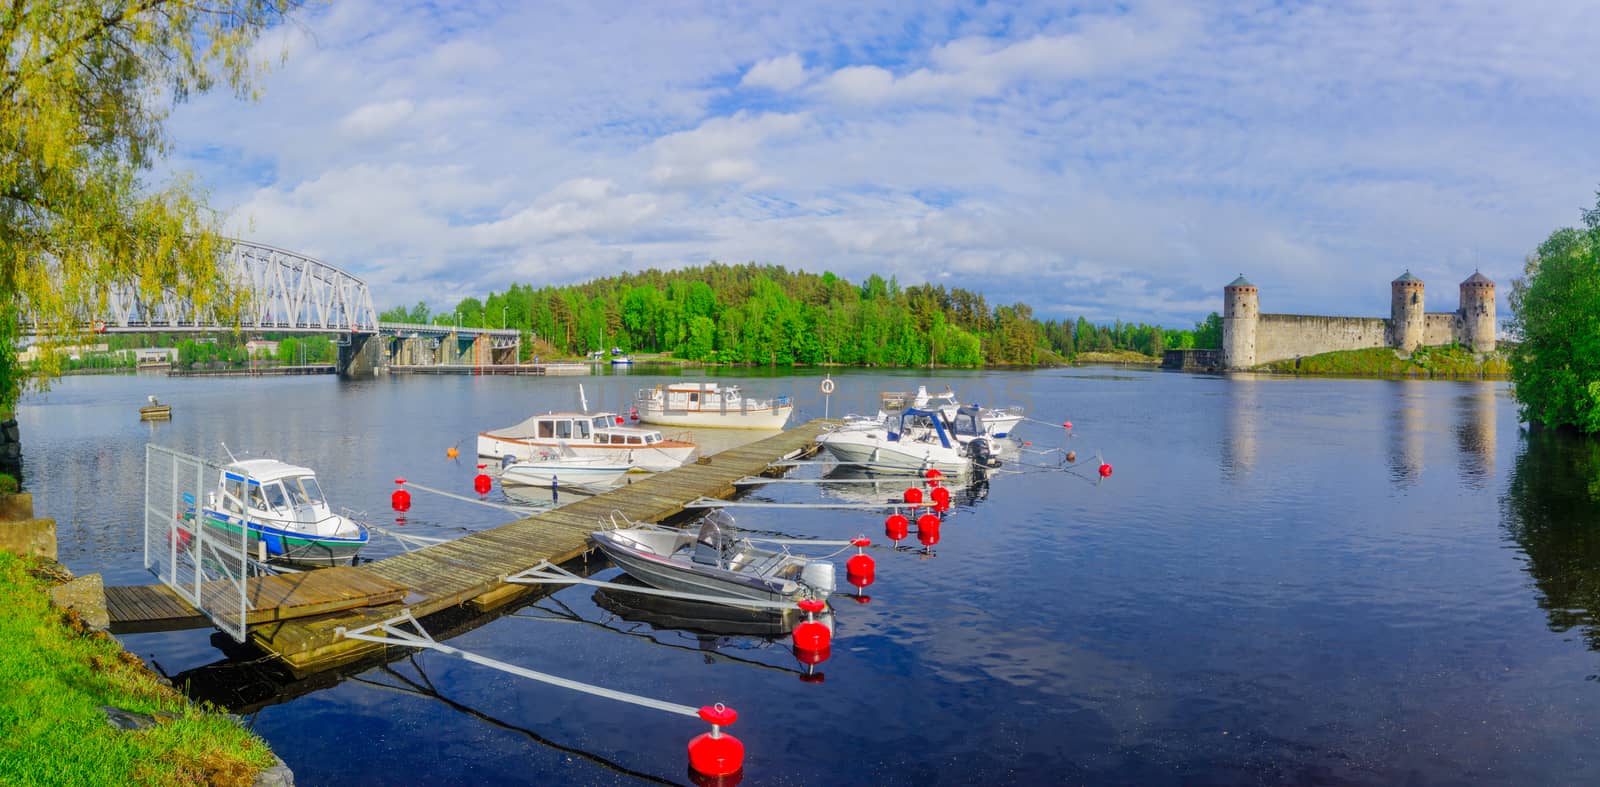 Panoramic view of a train bridge and the Olavinlinna castle in Savonlinna, Finland. It is a 15th-century three-tower castle